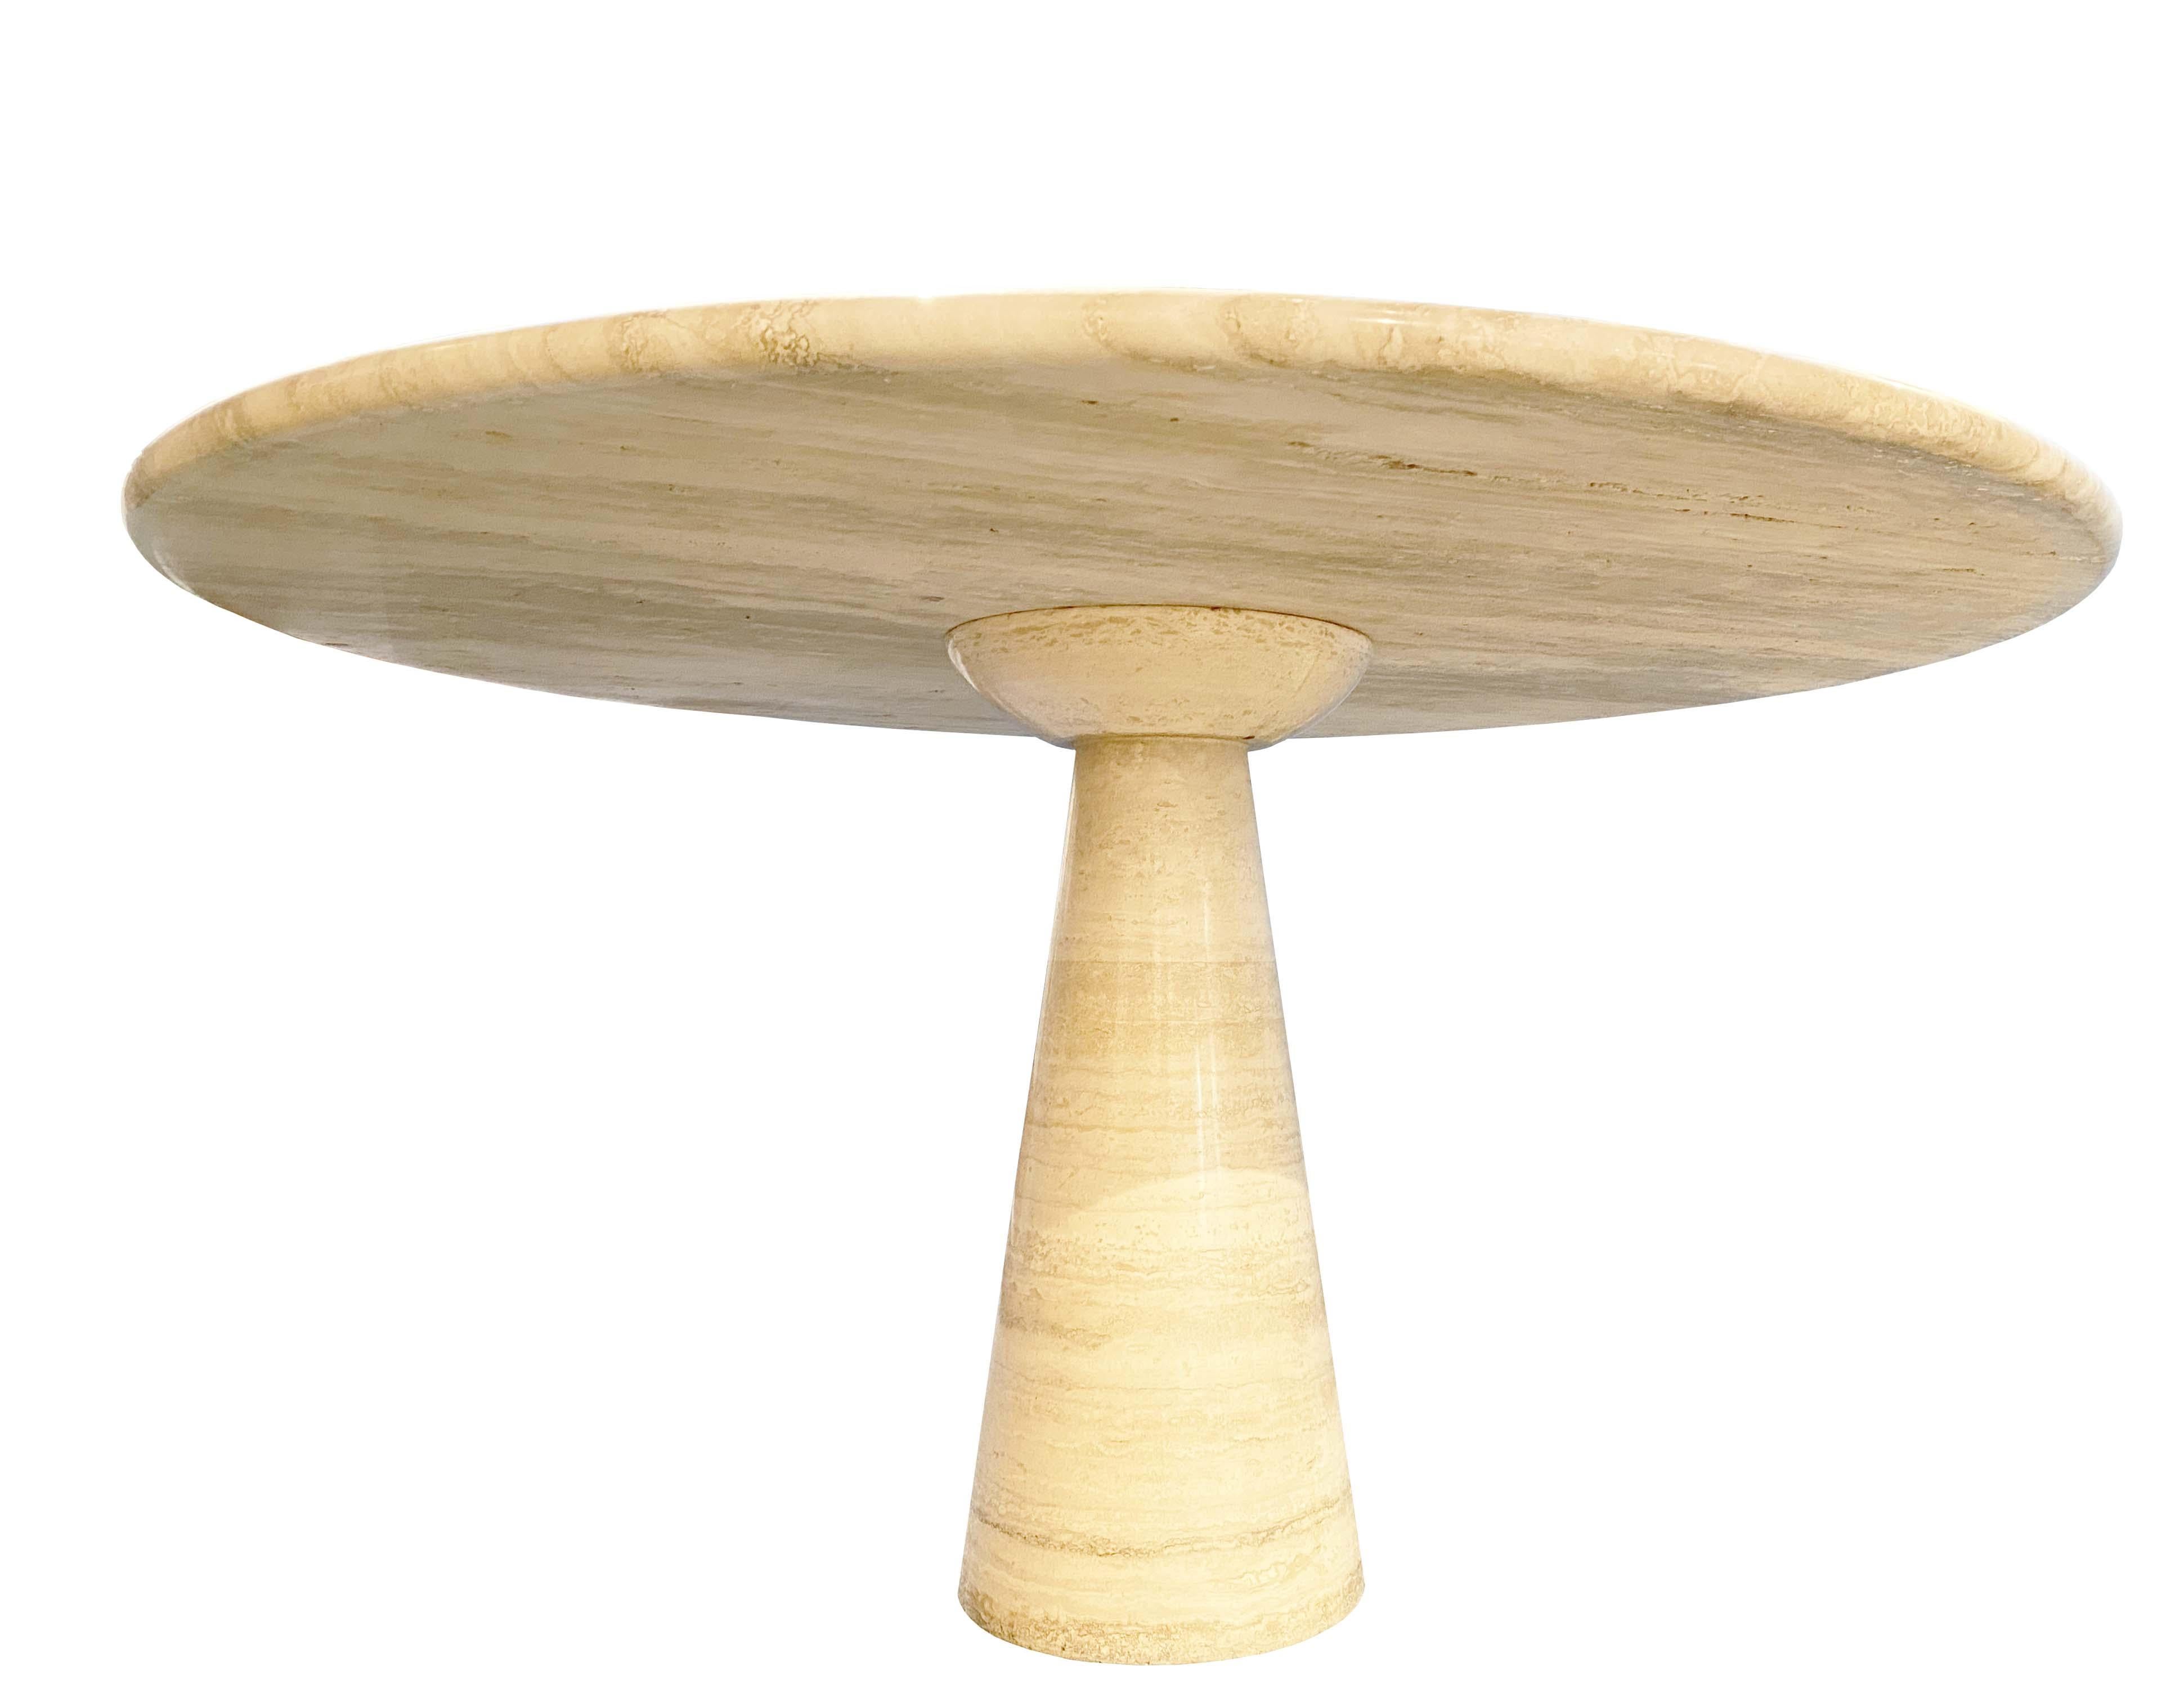 Italian Round Dining Table with Pedestal in Travertine Attributed to Angelo Mangiarotti